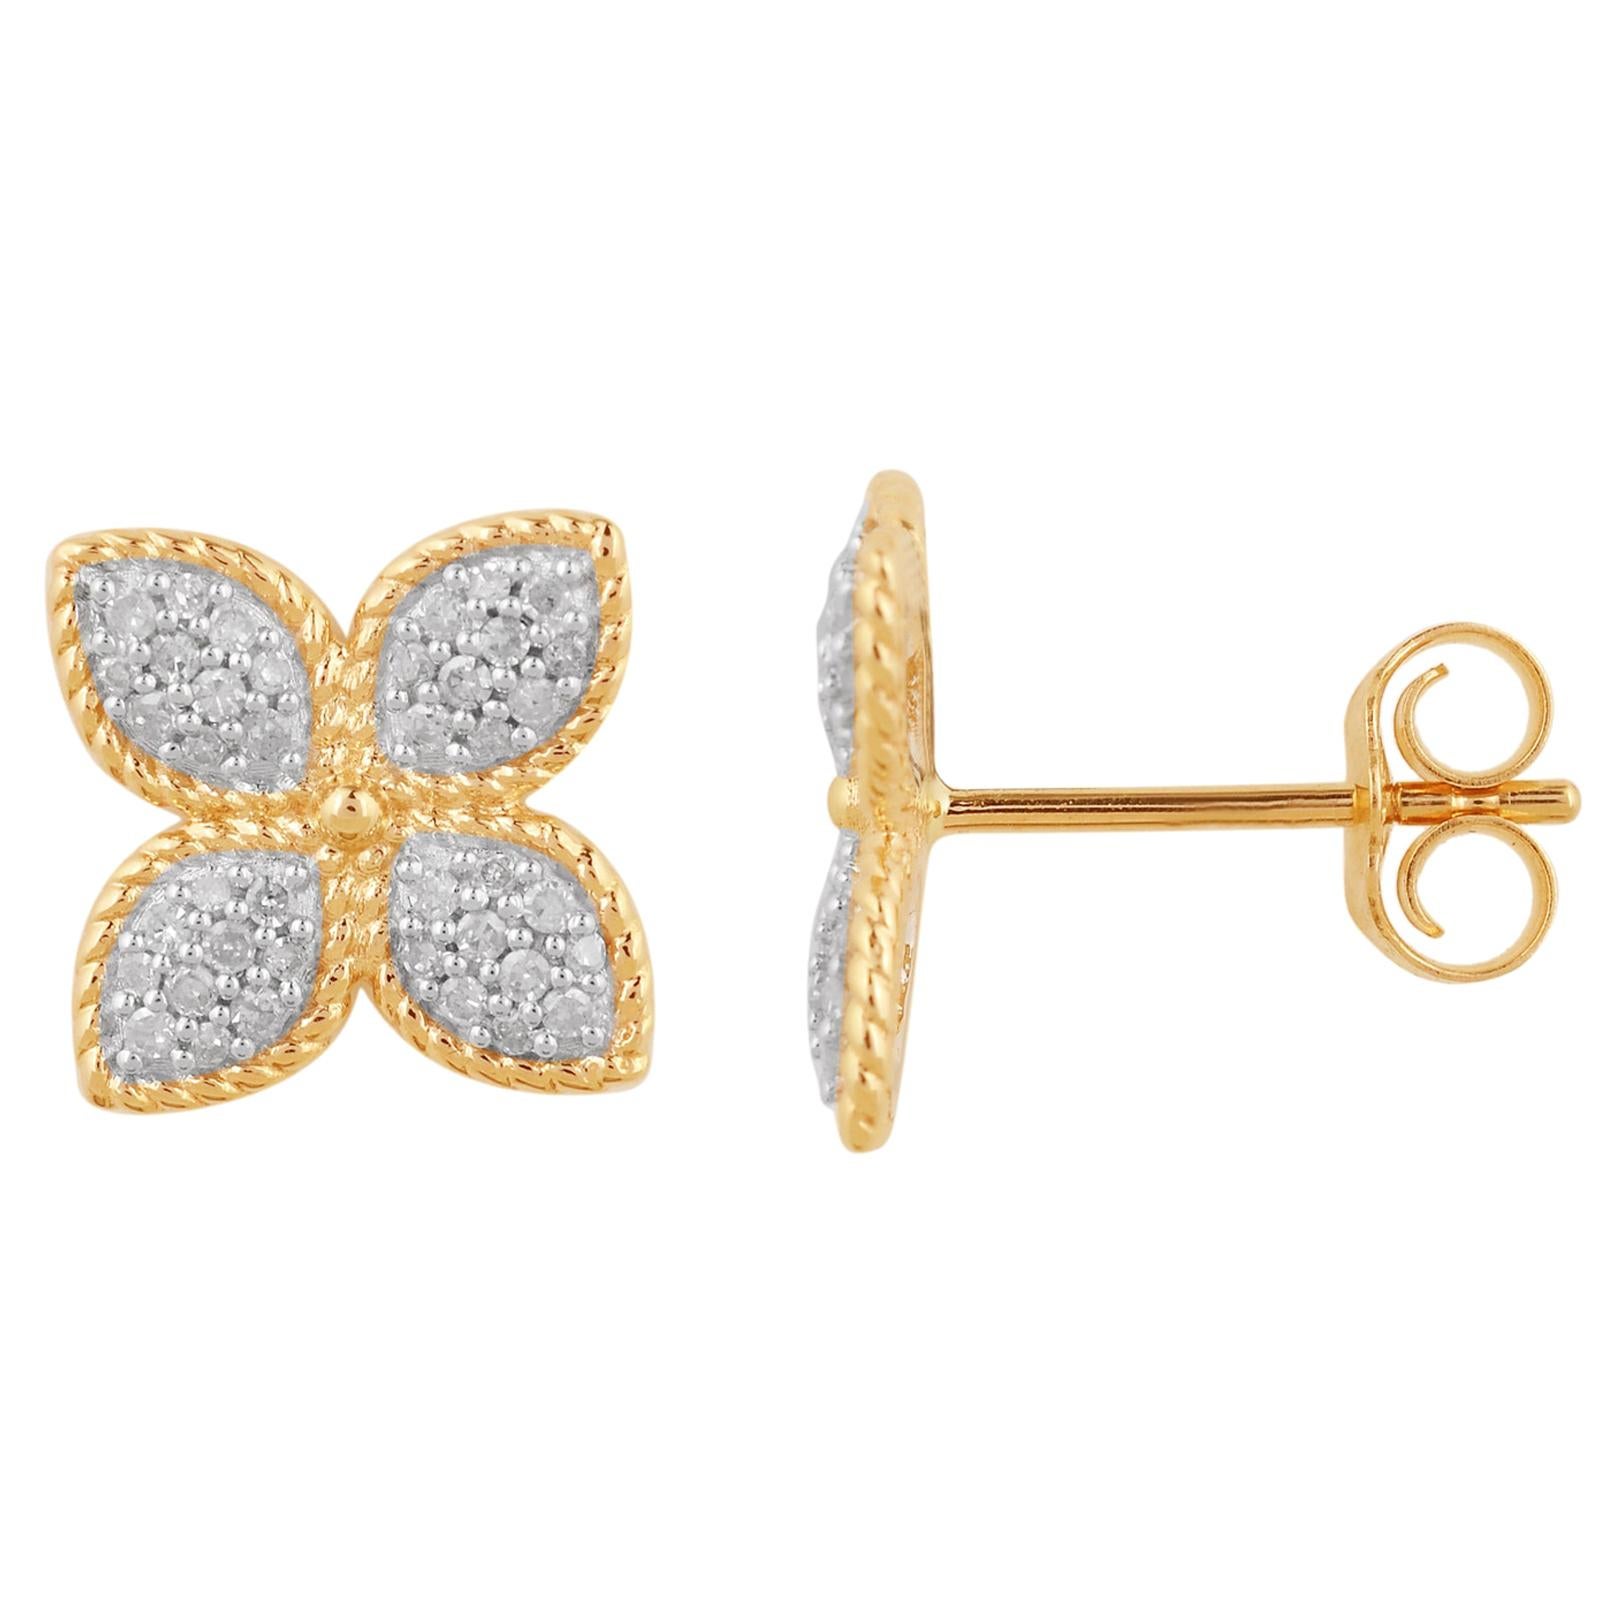 TJD 1/4Carat Round Diamond 14K Yellow Gold Beaded Edge 4Leaf Clover Stud Earring For Sale